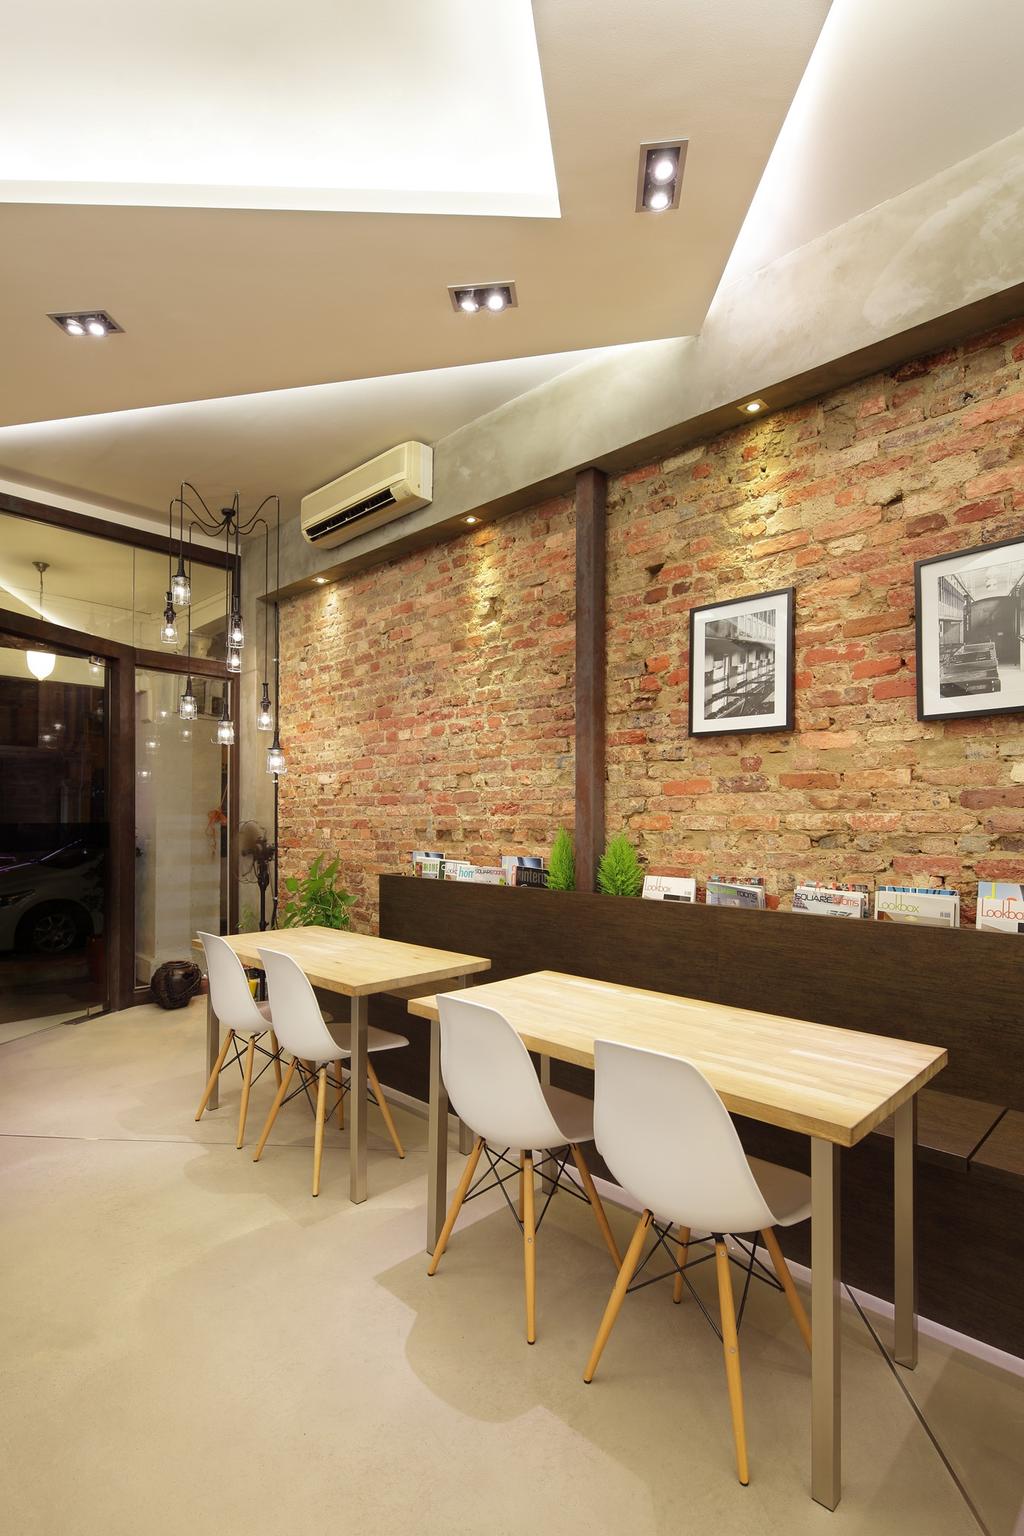 318 Joo Chiat Road, Commercial, Interior Designer, Space Define Interior, Modern, Red Brick Wall, Raw, Hanging Light, Bench, Table, Chair, Woodwork, Wood Laminate, Wood, Laminates, False Ceiling, Concealed Lighting, Furniture, Dining Room, Indoors, Interior Design, Room, Cafe, Restaurant, Plywood, Dining Table